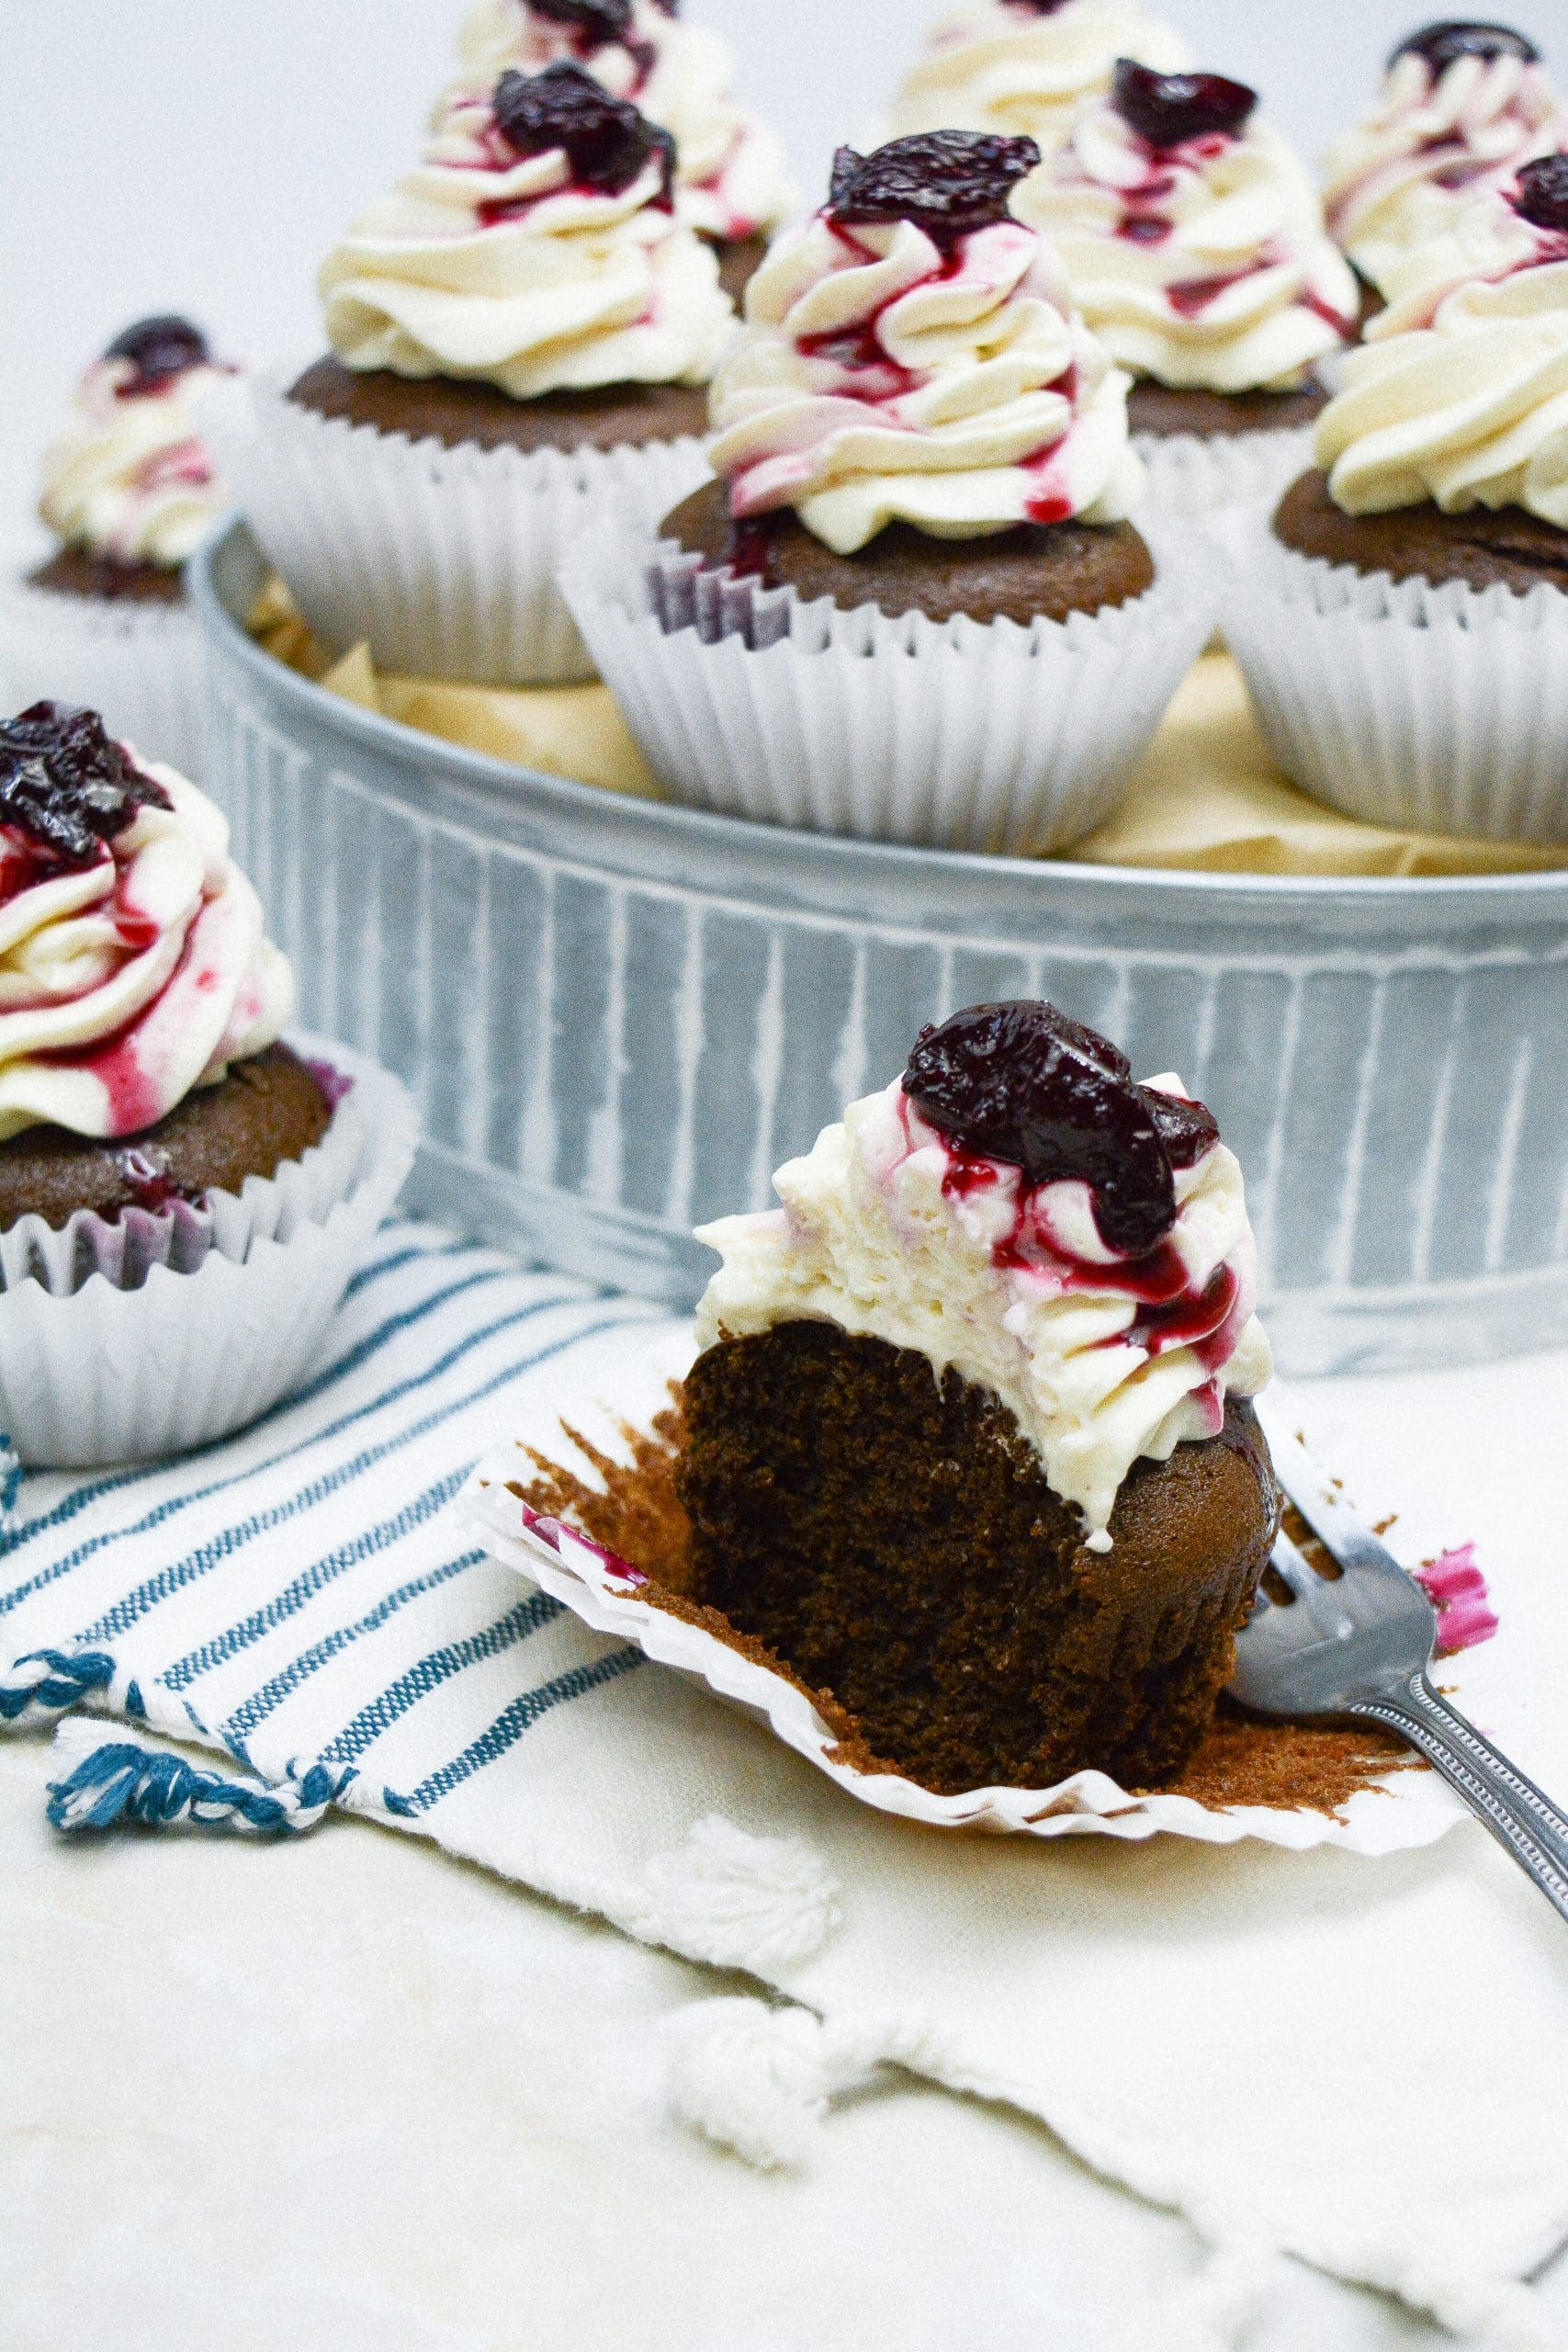 black forest cupcake sitting on a white and blue striped cloth napkin